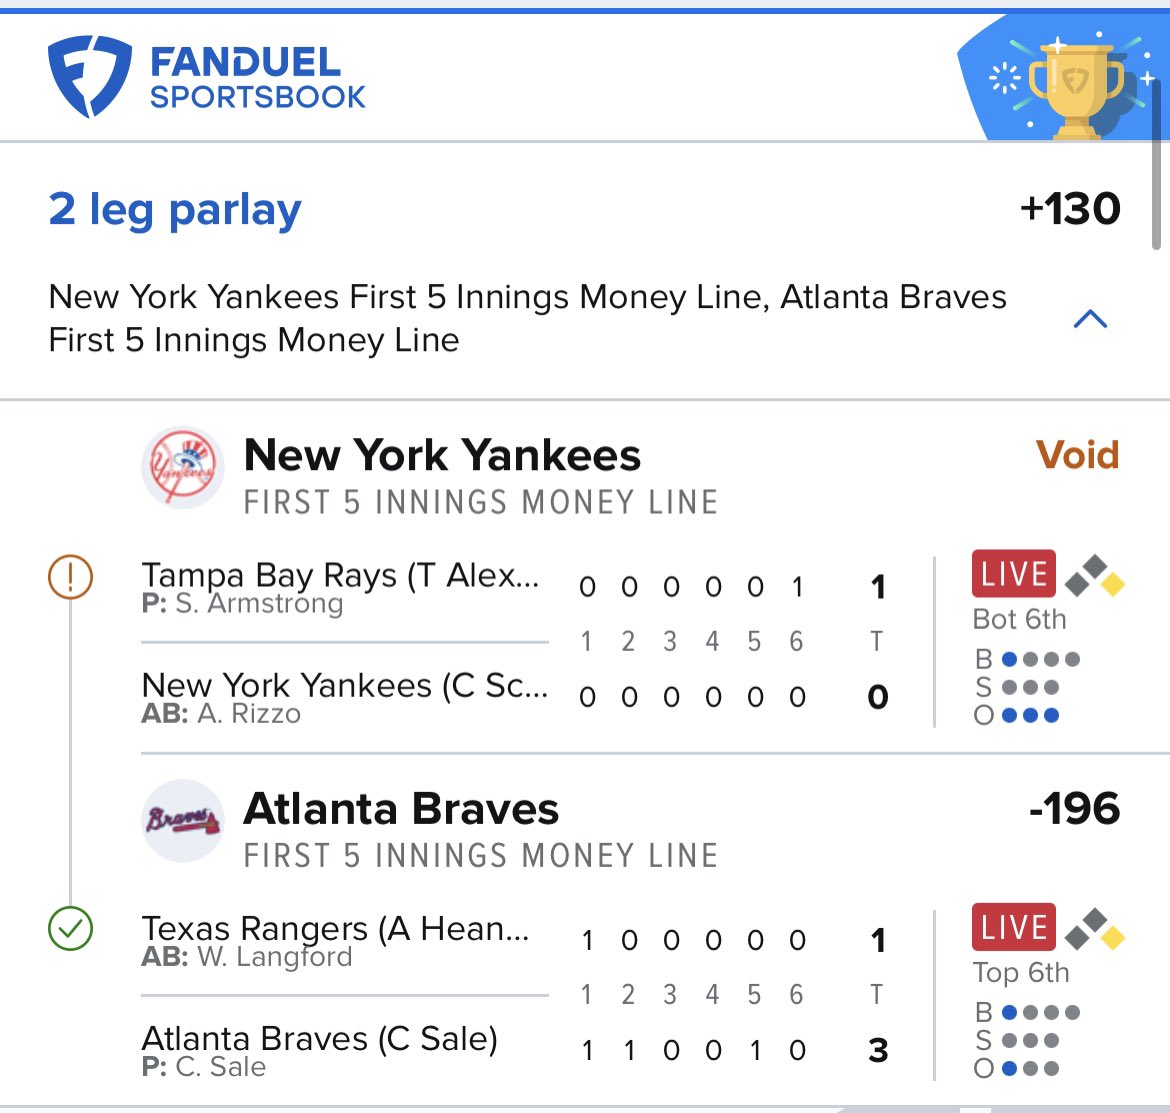 💰💰💰💰💣 I’ll take a -196 cash over a push or loss every day of the week… Yankees couldn’t score a single run to make this a full +130 cash… flawless run extends to 9 straight plays… I’ll keep picking plays that don’t lose… back tomorrow morning to continue…